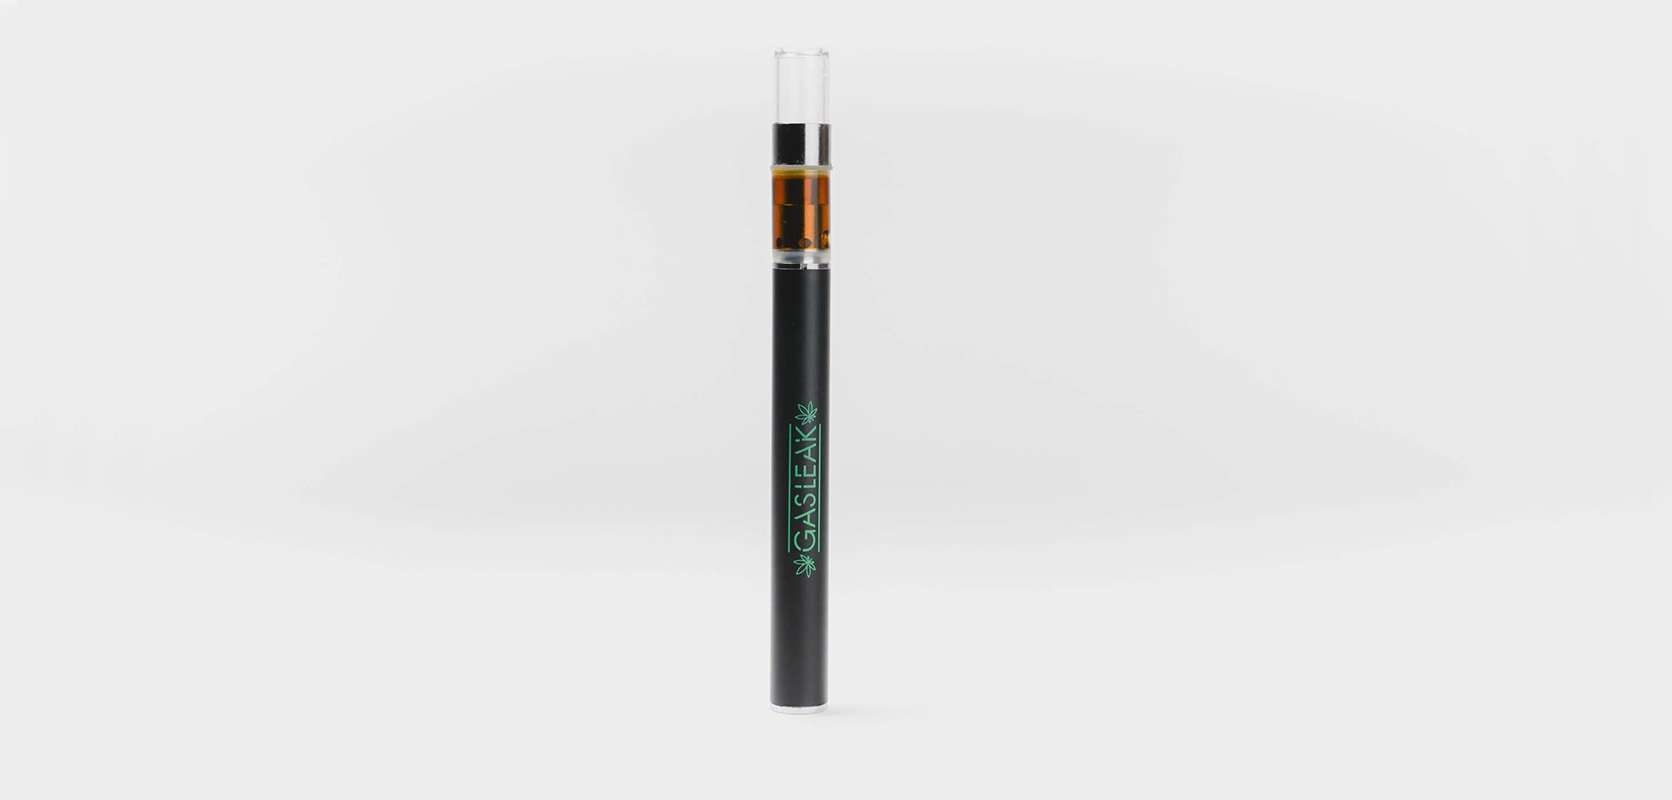 Disposable THC Vape Pen from Low Price Bud weed dispensary. cannabis stores. weed delivery canada. weed online. dispenseries.